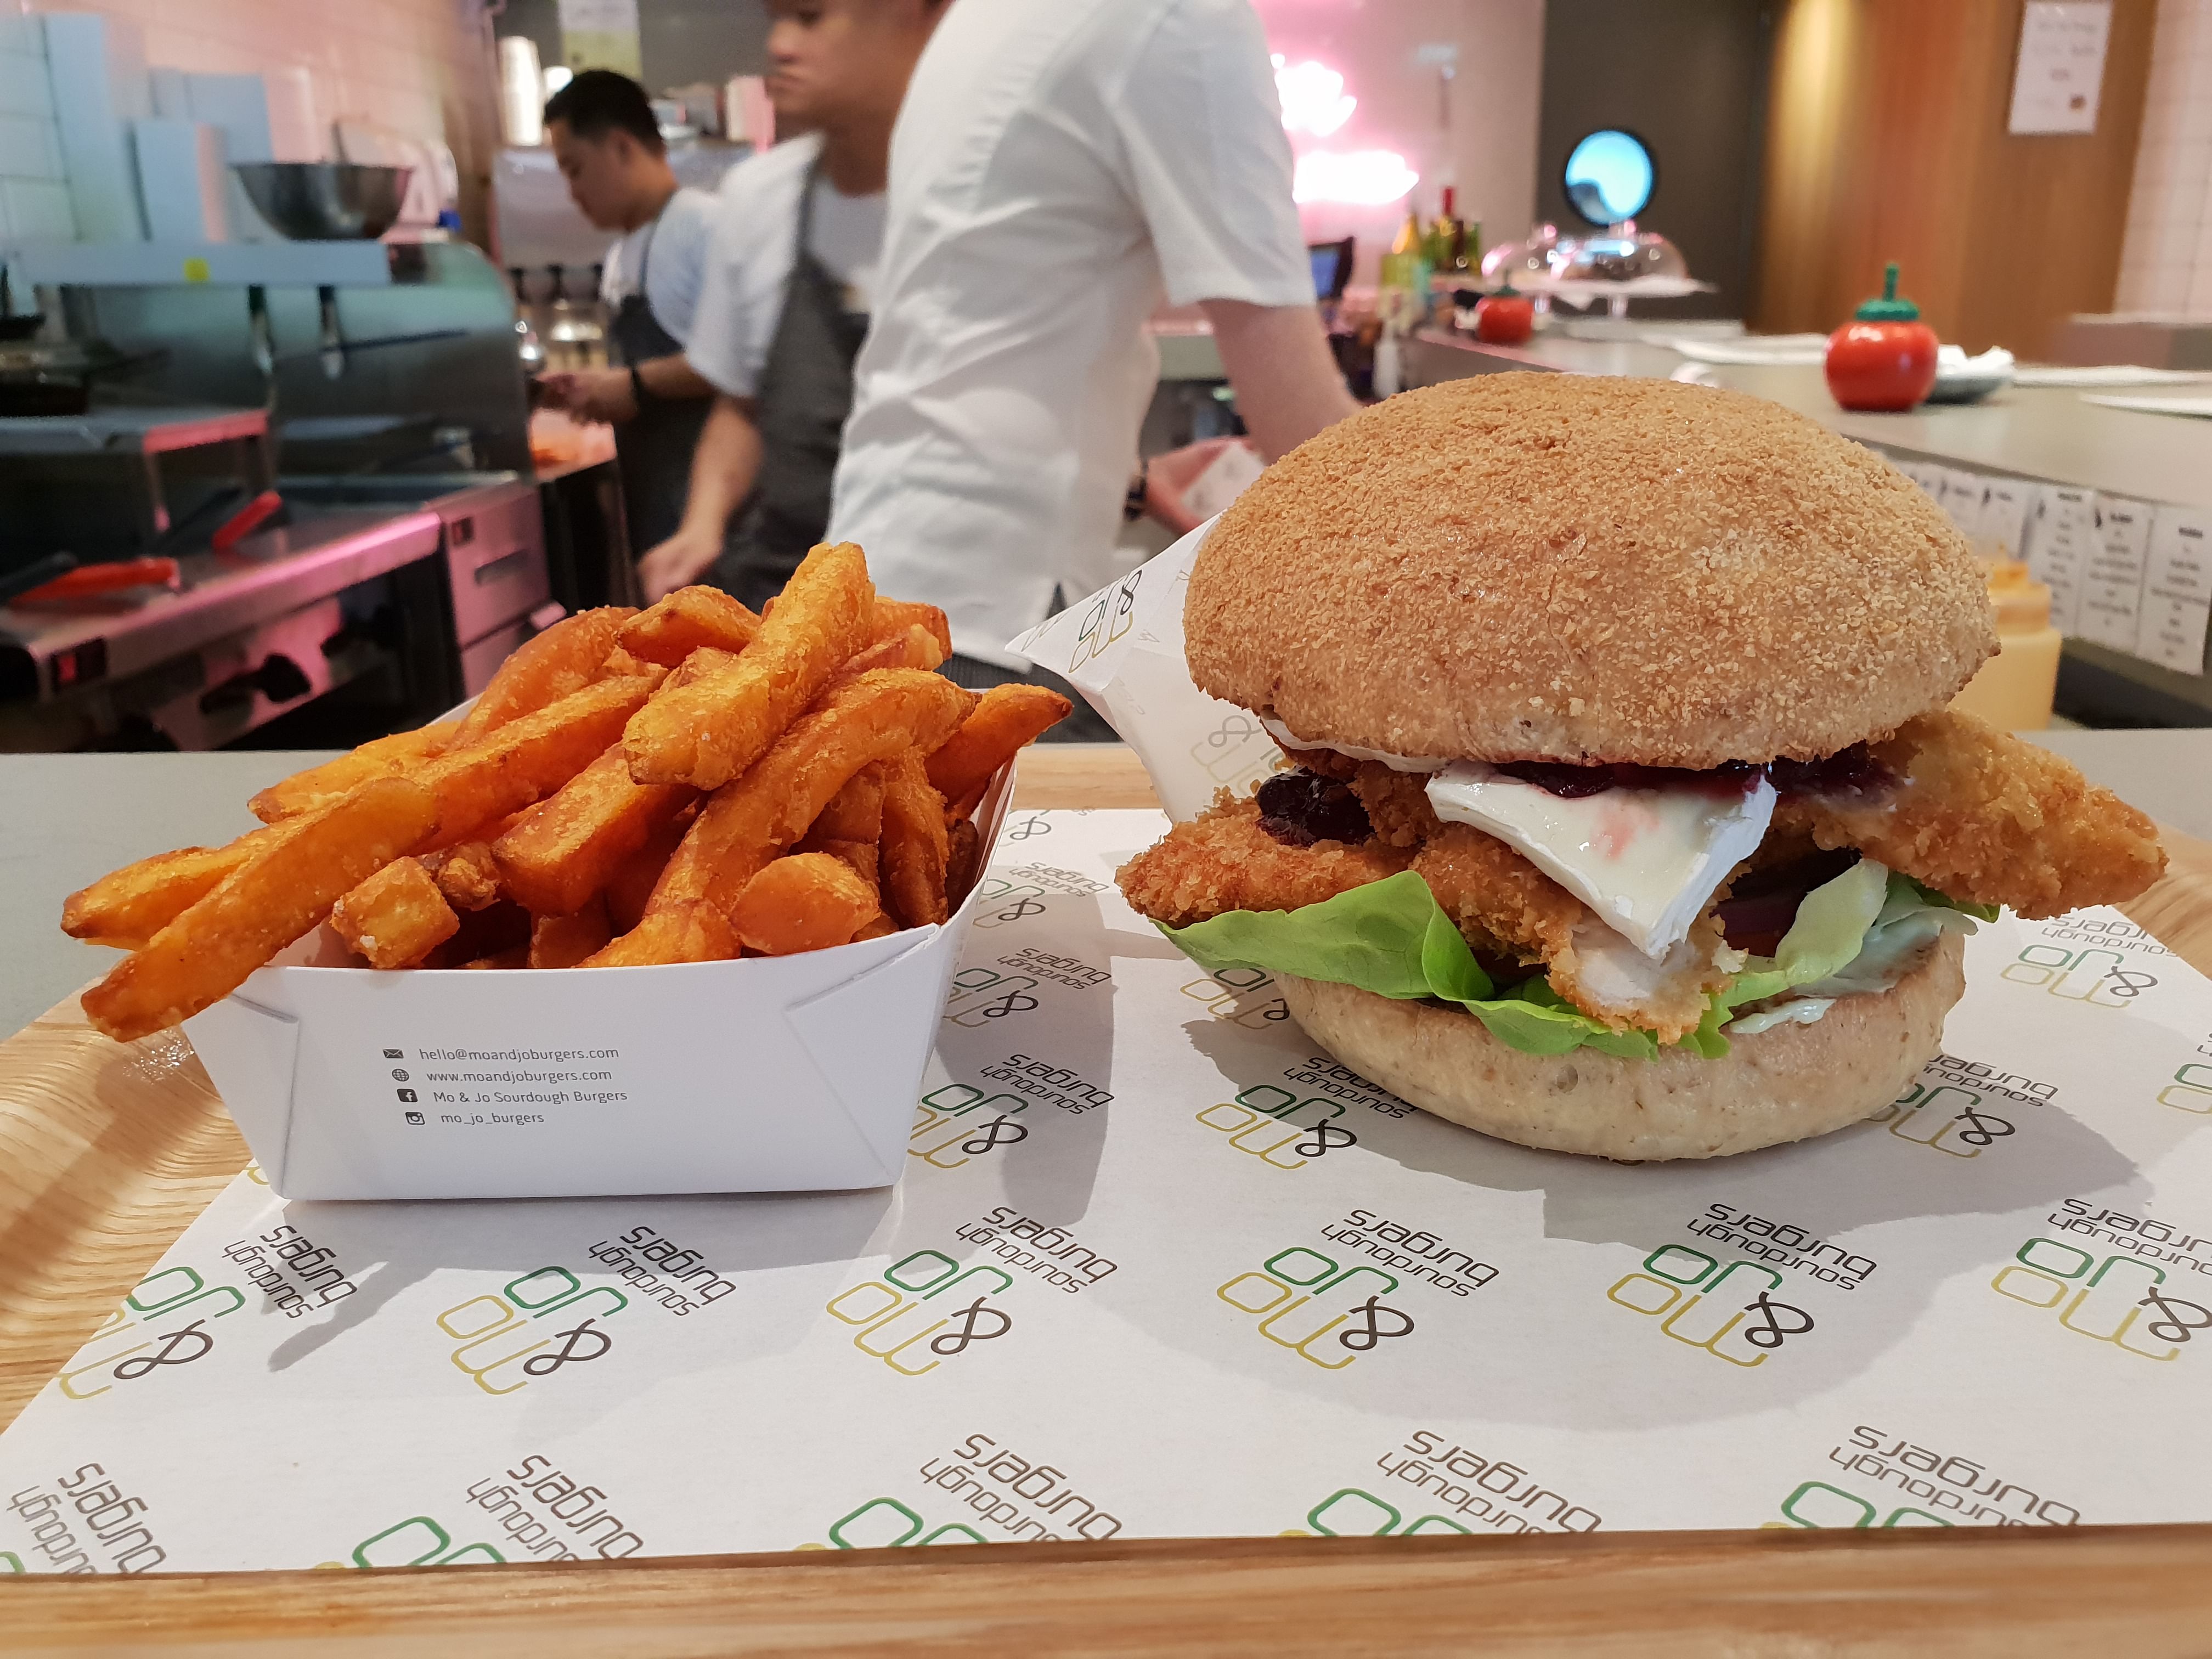 The Naughty CCC burger combines chicken, cheese and cranberry to great effect